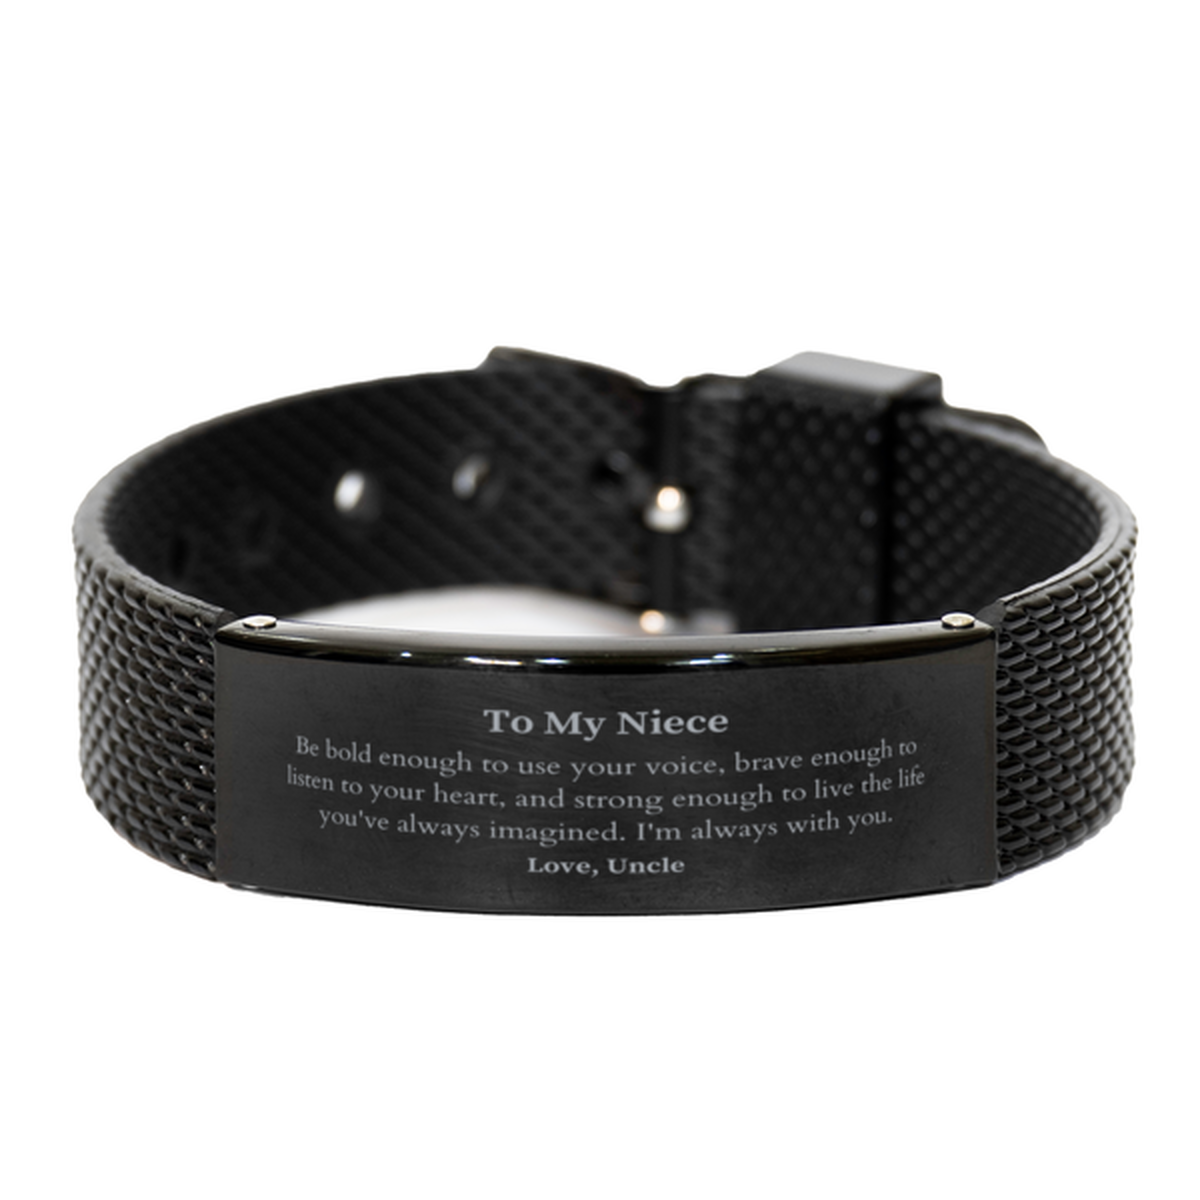 Keepsake Niece Black Shark Mesh Bracelet Gift Idea Graduation Christmas Birthday Niece from Uncle, Niece Be bold enough to use your voice, brave enough to listen to your heart. Love, Uncle